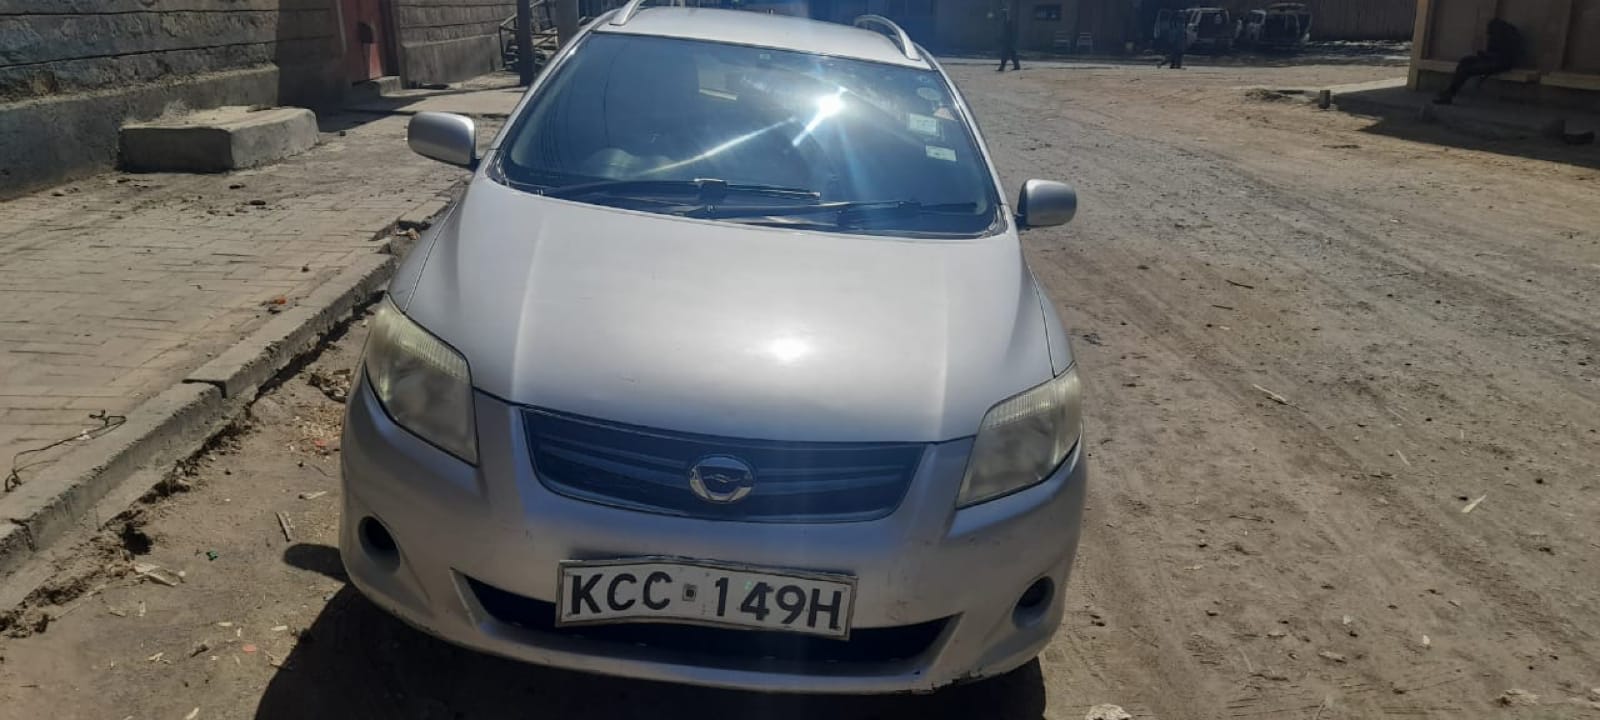 Toyota fielder 2010 QUICK SALE YOU Pay 30% Deposit Trade in OK Wow